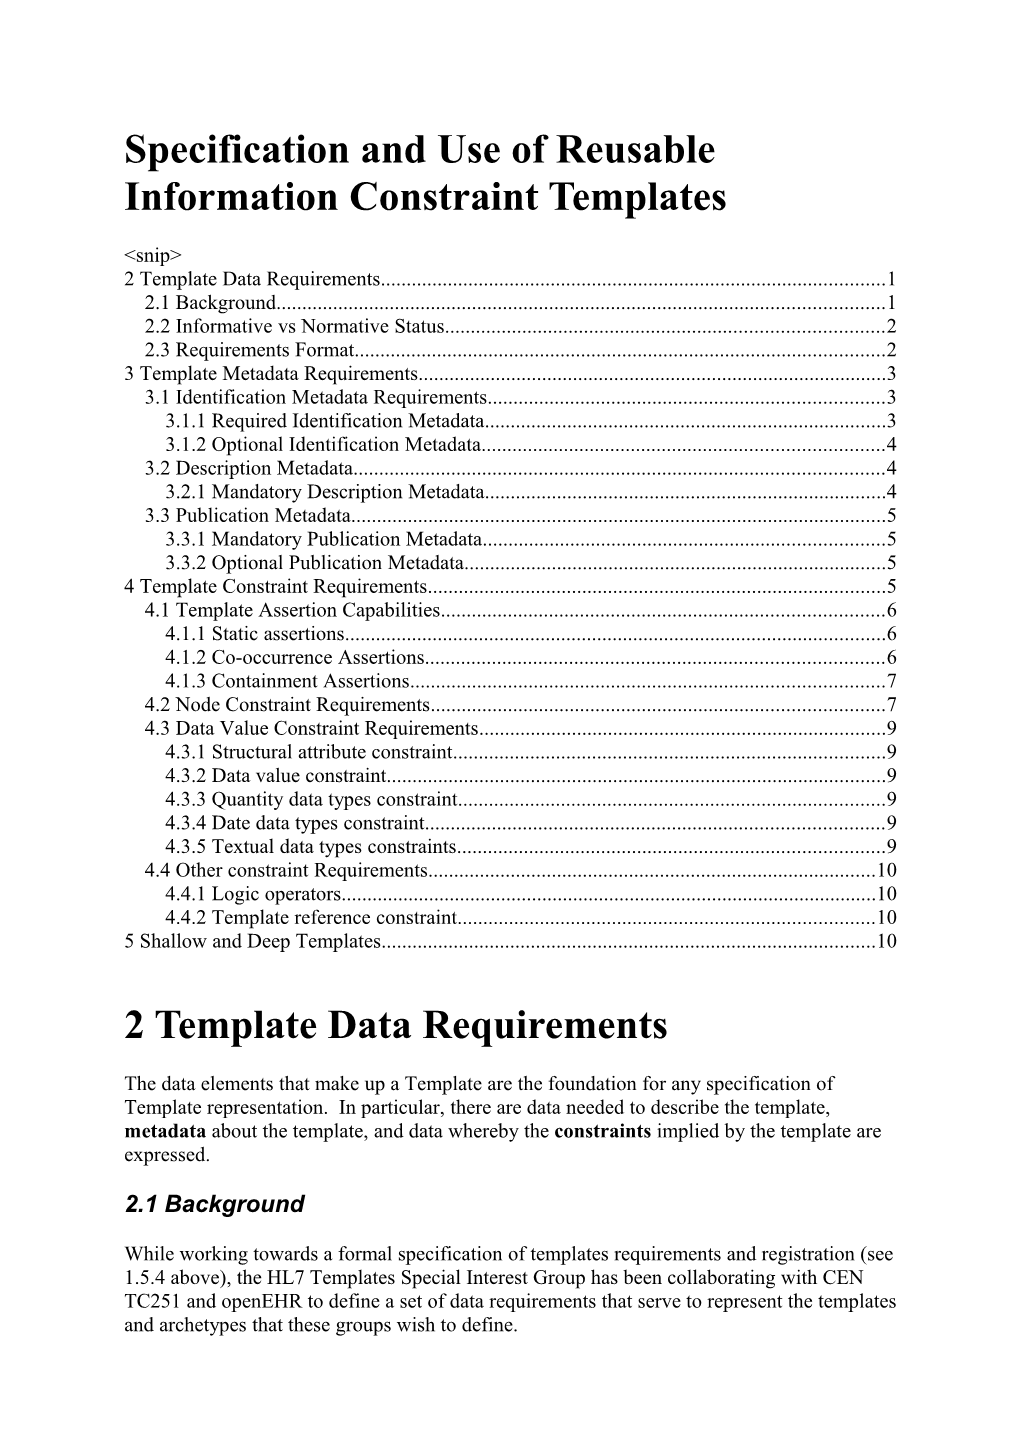 Specification and Use of Reusable Information Constraint Templates